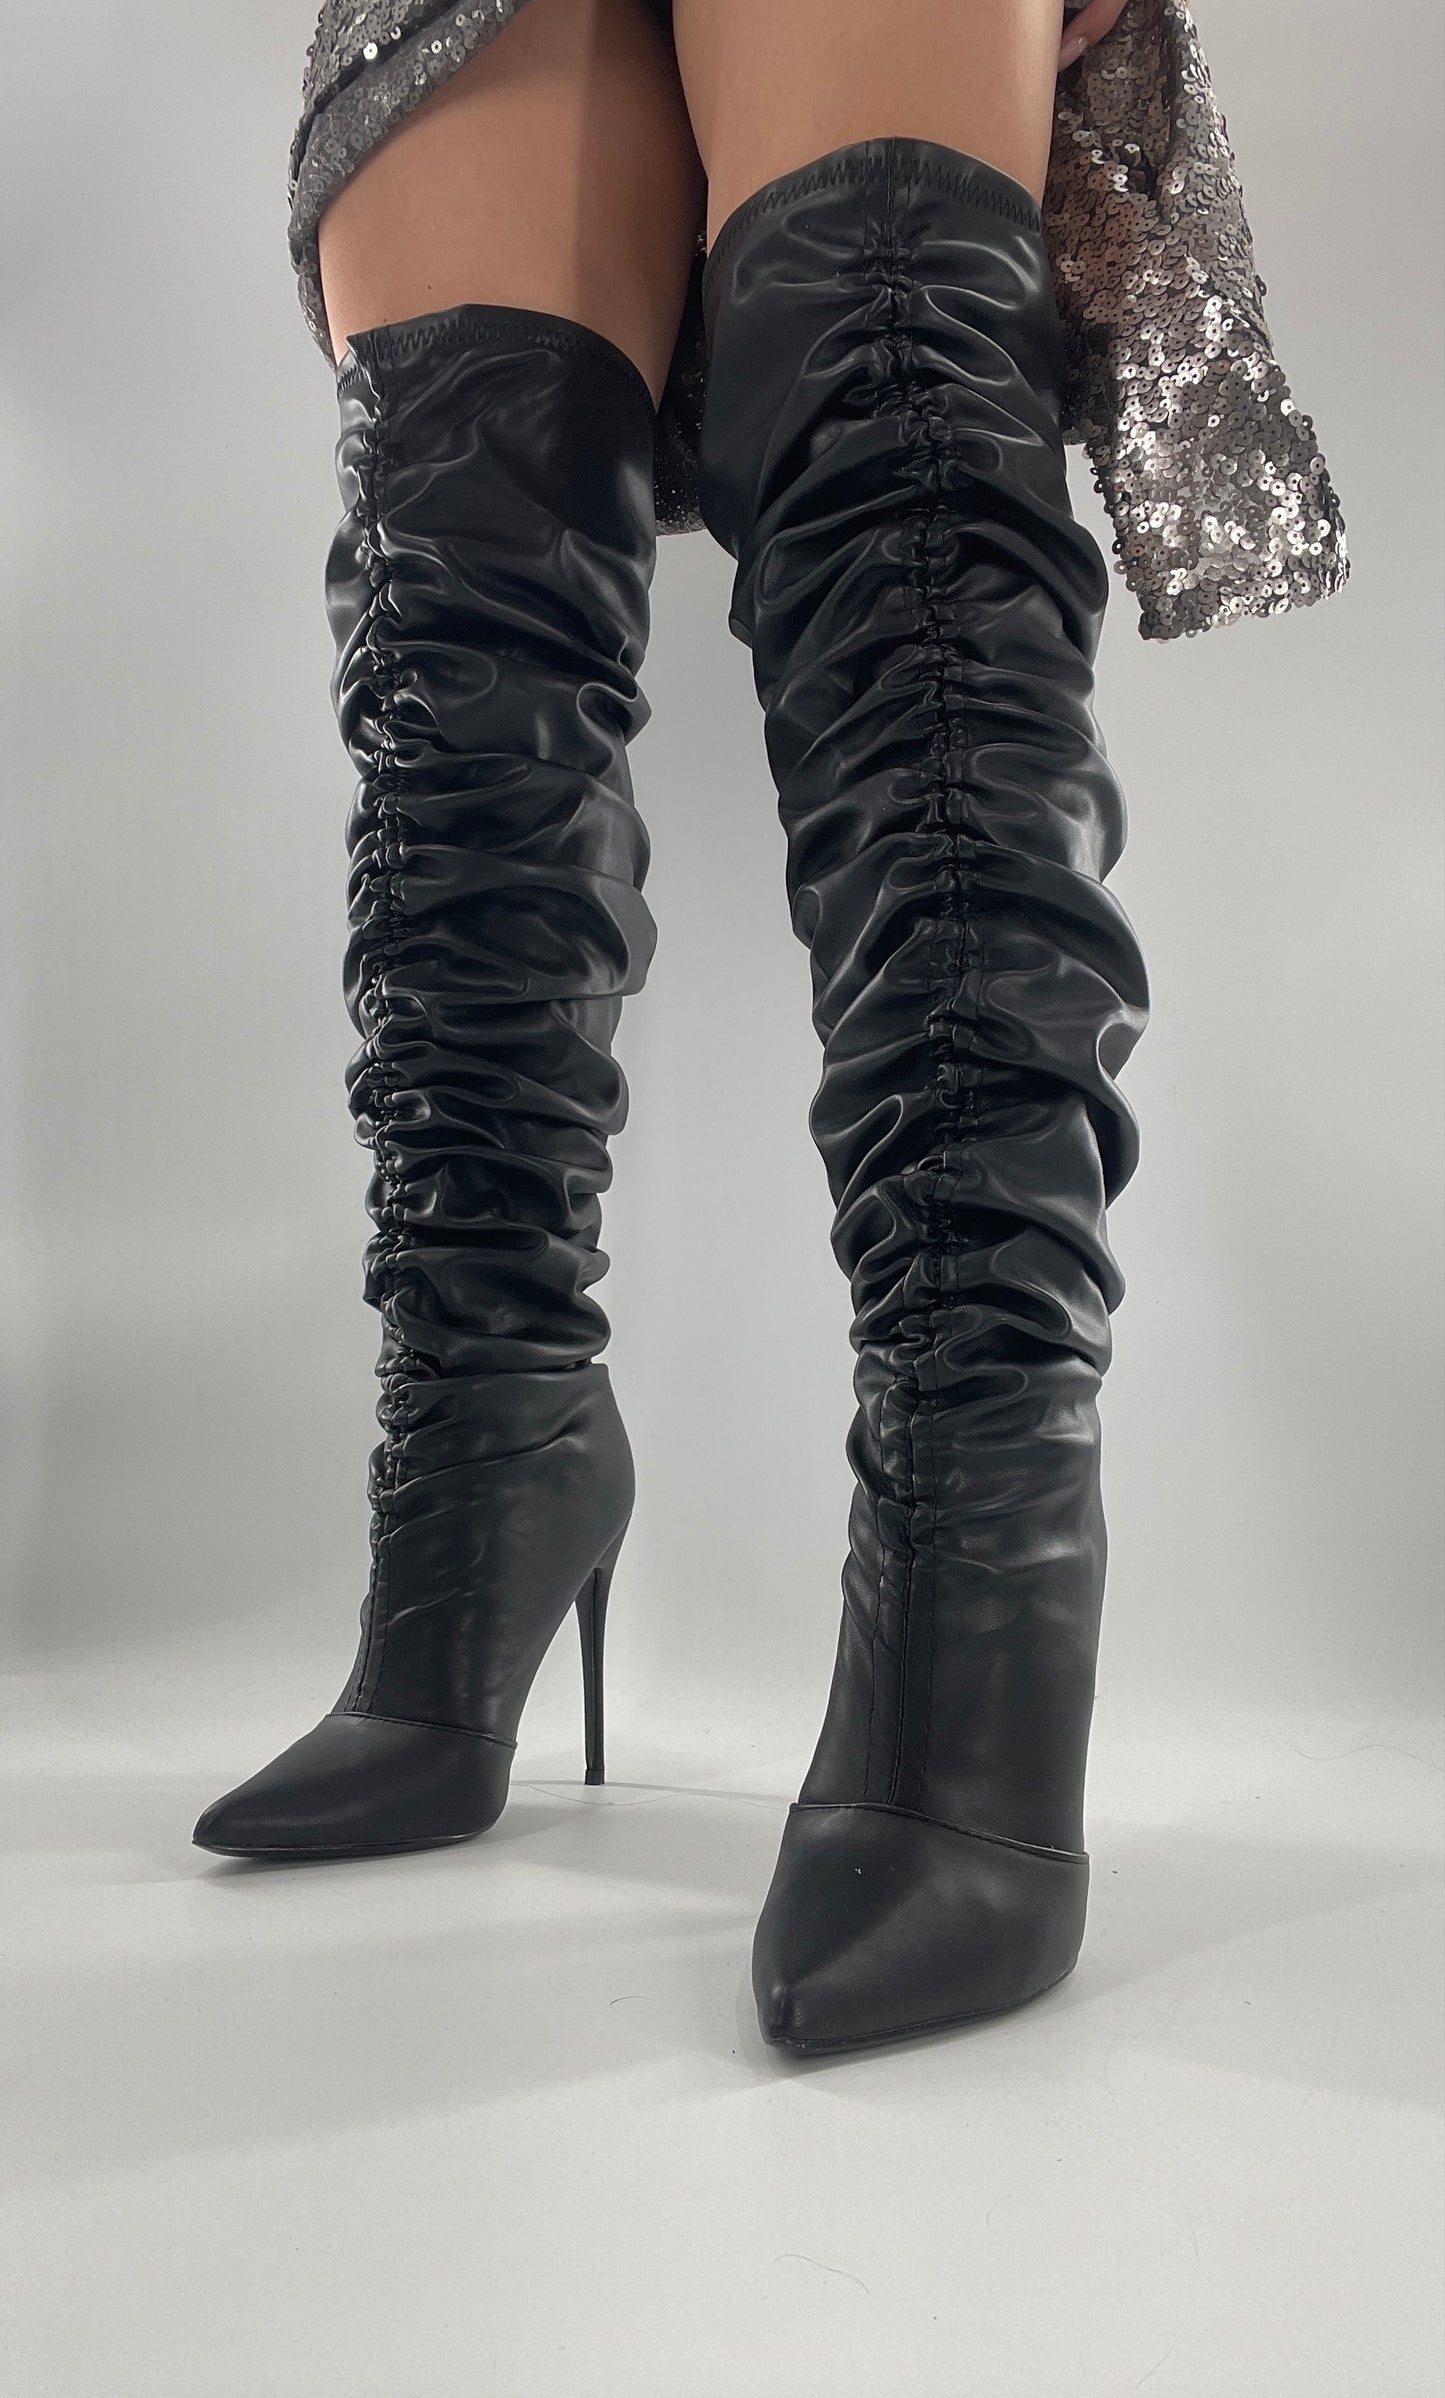 Unlabeled Black Vegan Leather Thigh High Scrunch Boots (8)